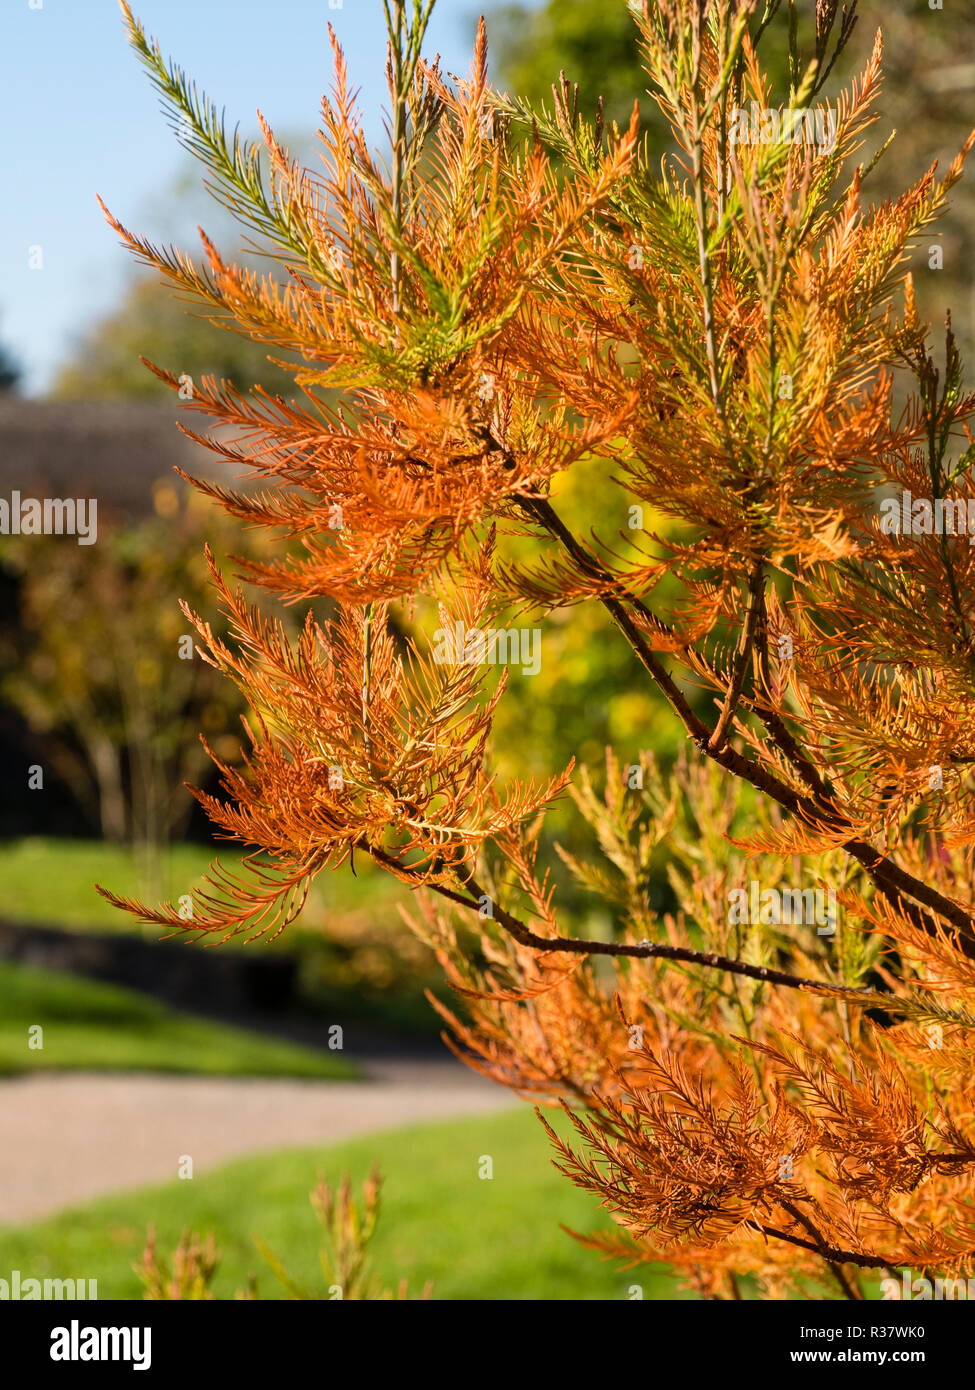 Autumn colour in the needle like leaves of the Chinese swamp cypress, Glyptostrobus pensilis Stock Photo